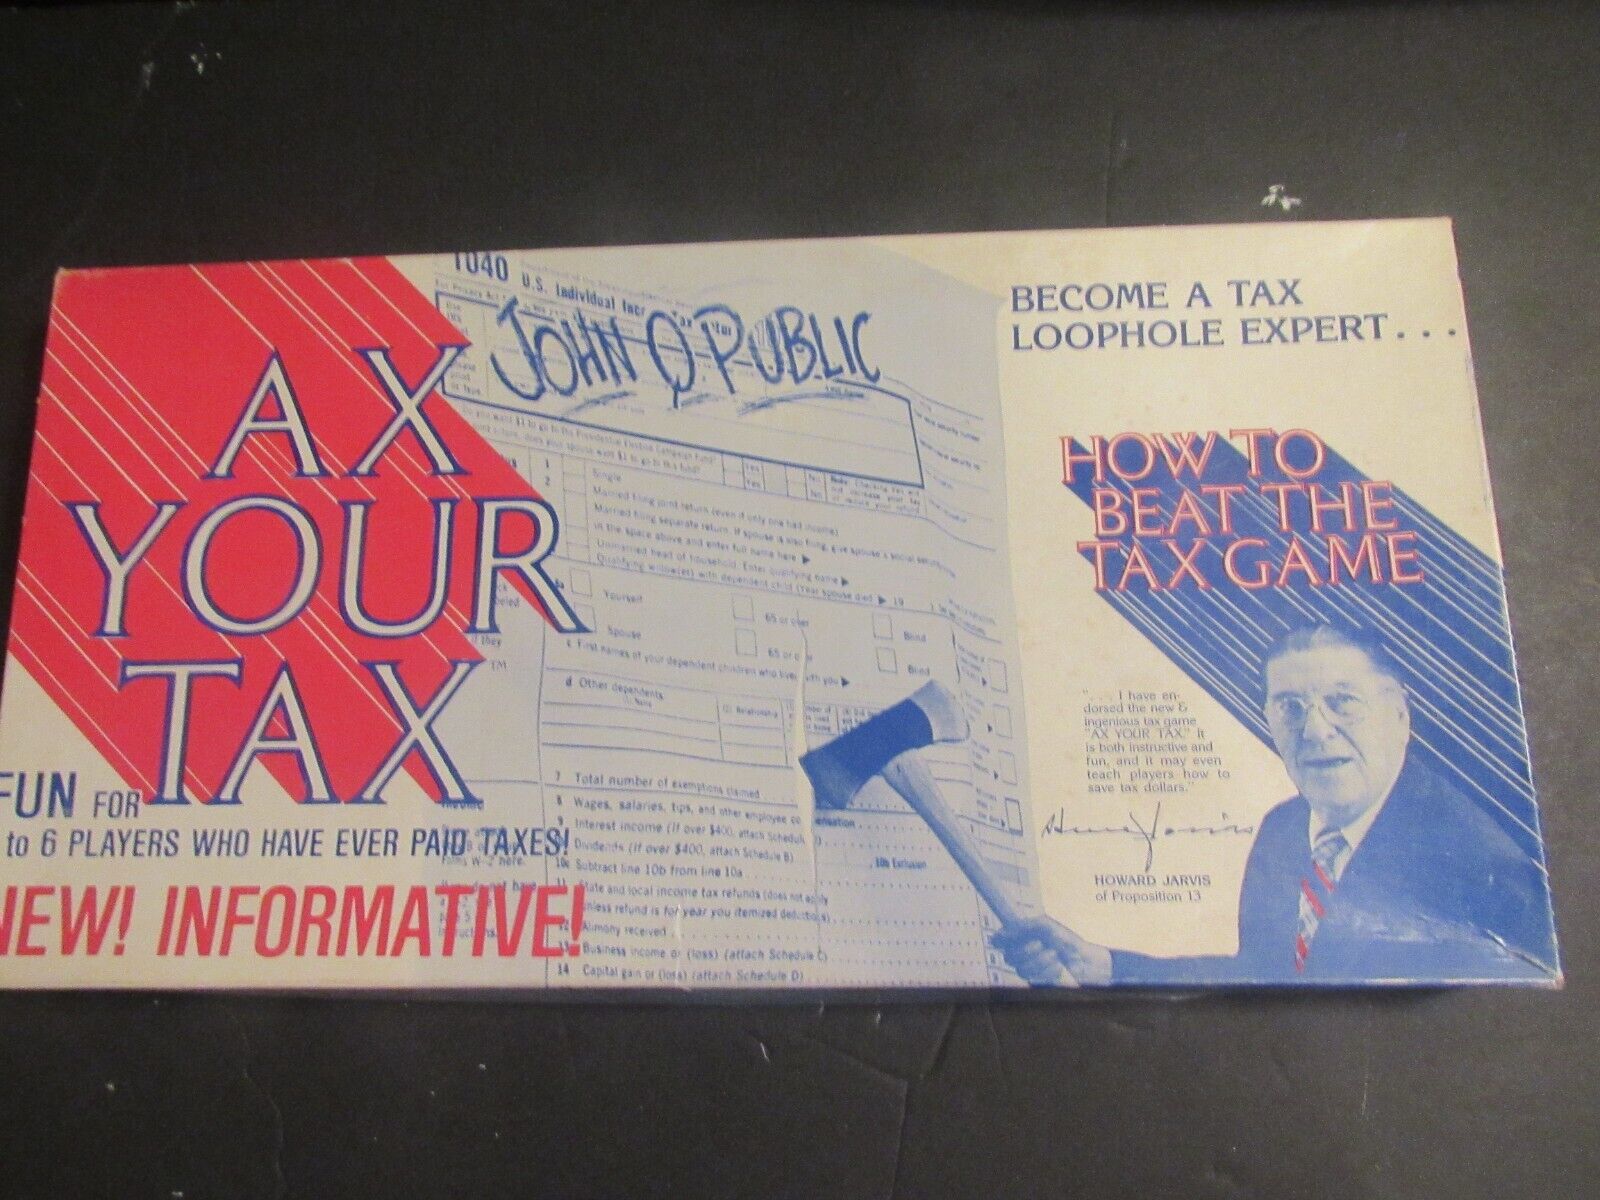 AX YOUR TAX GAME 1979 HOWARD JARVIS COMPLETE 